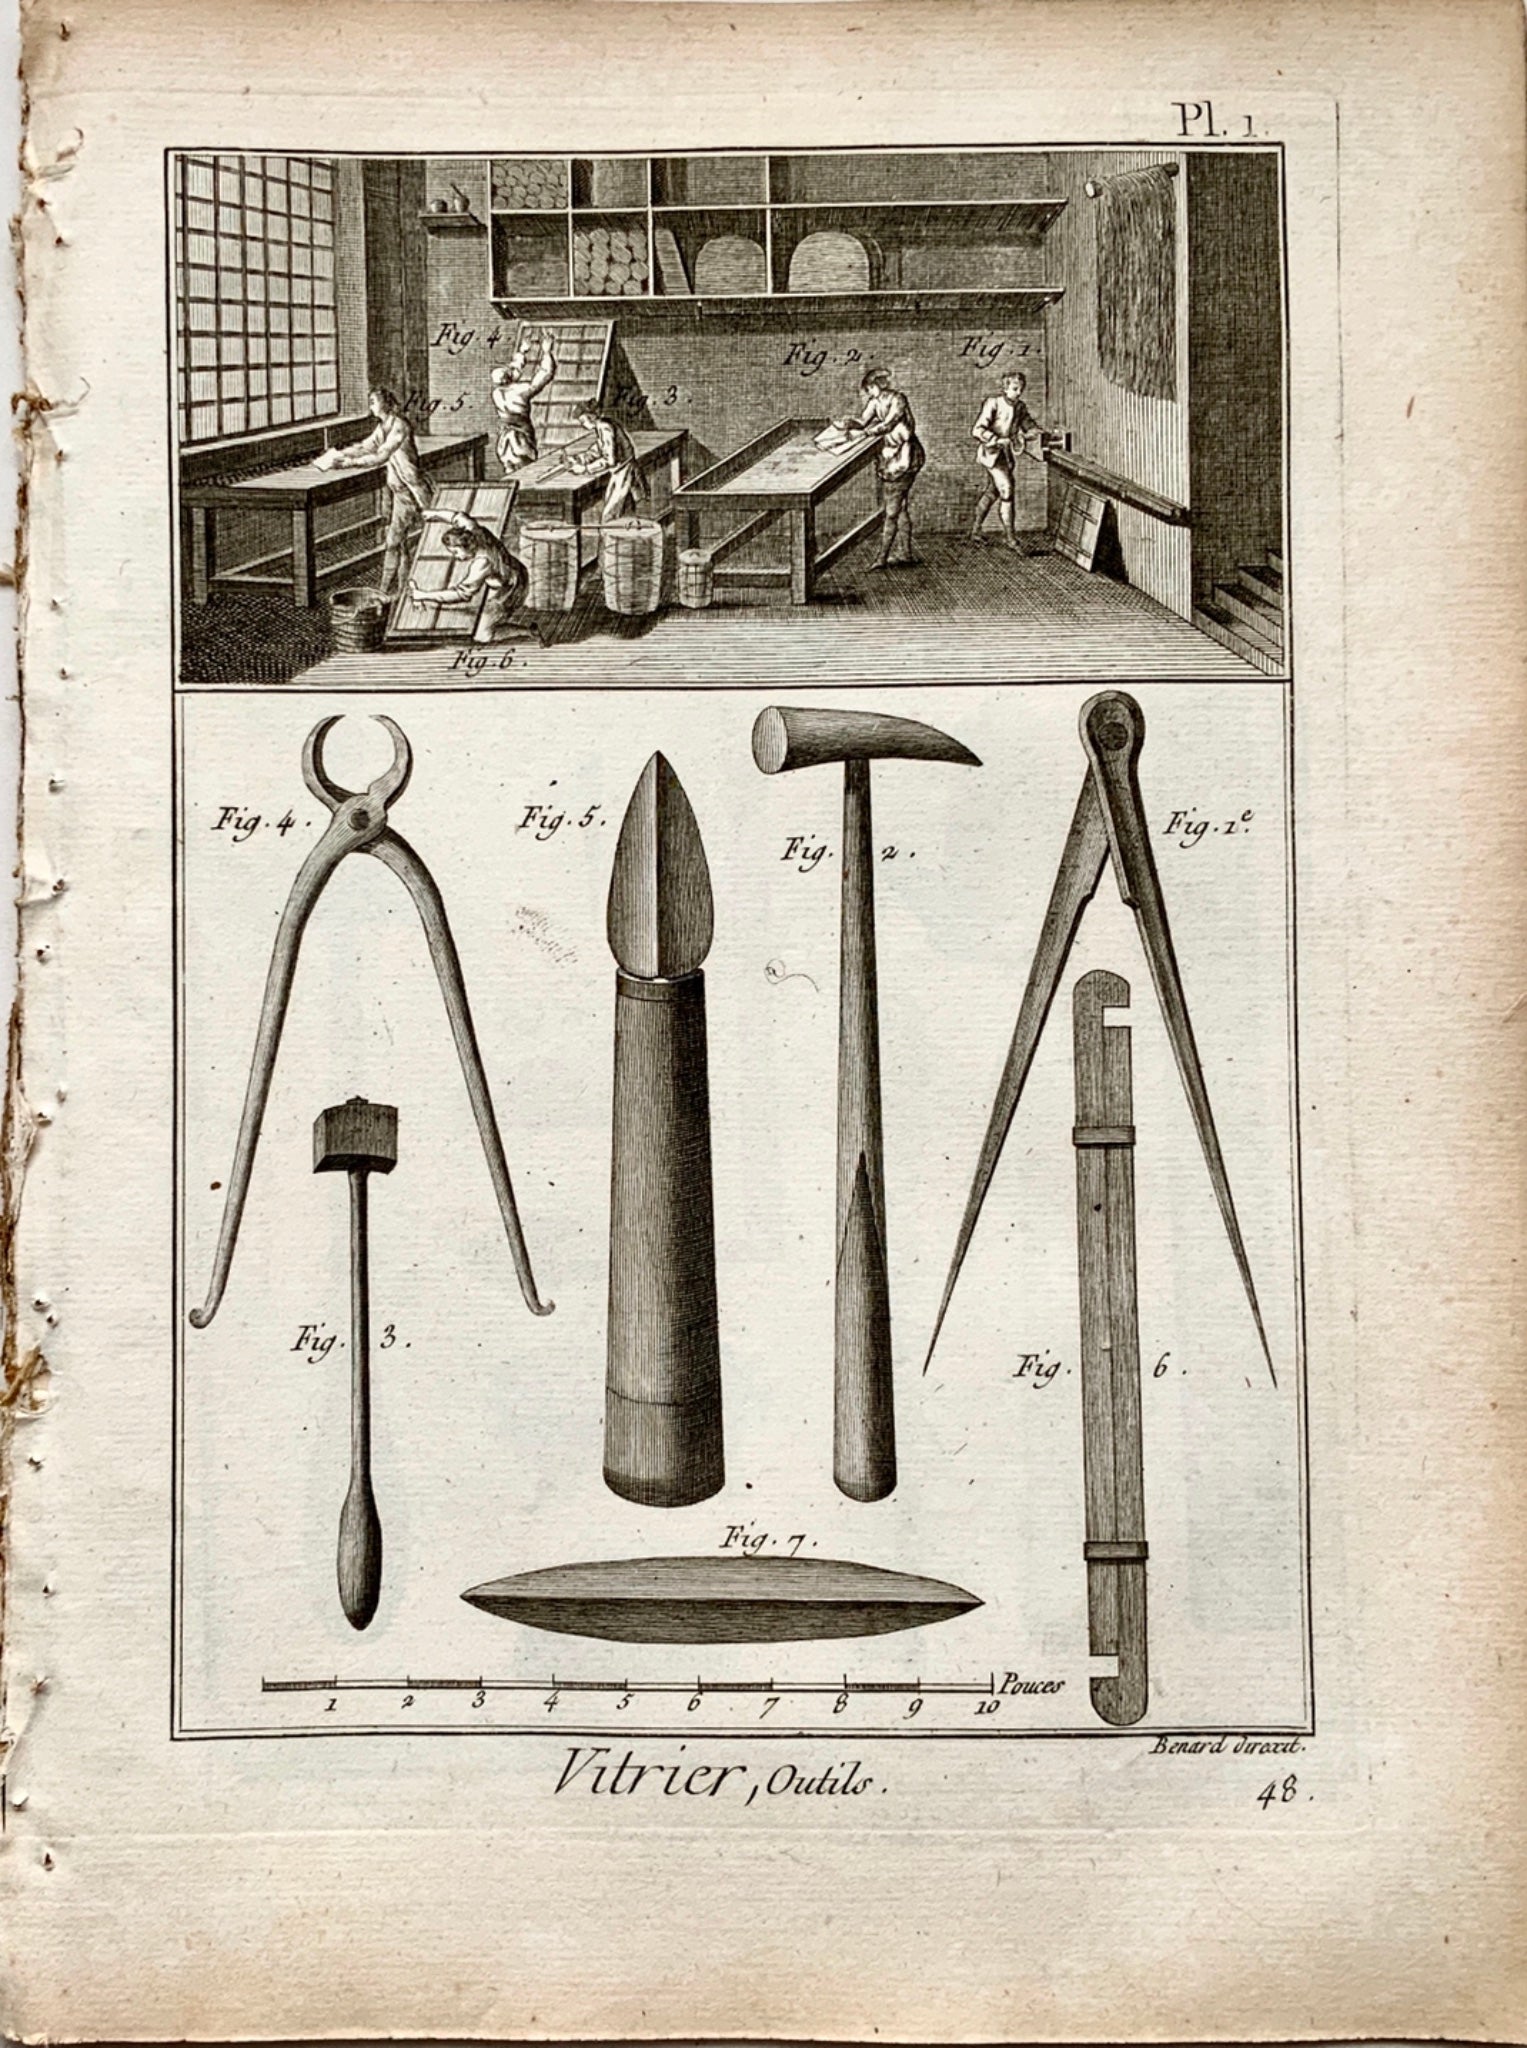 1787 GLAZIER - Vitrier - Set of 8 engravings on the Fitting of Glass - Trades